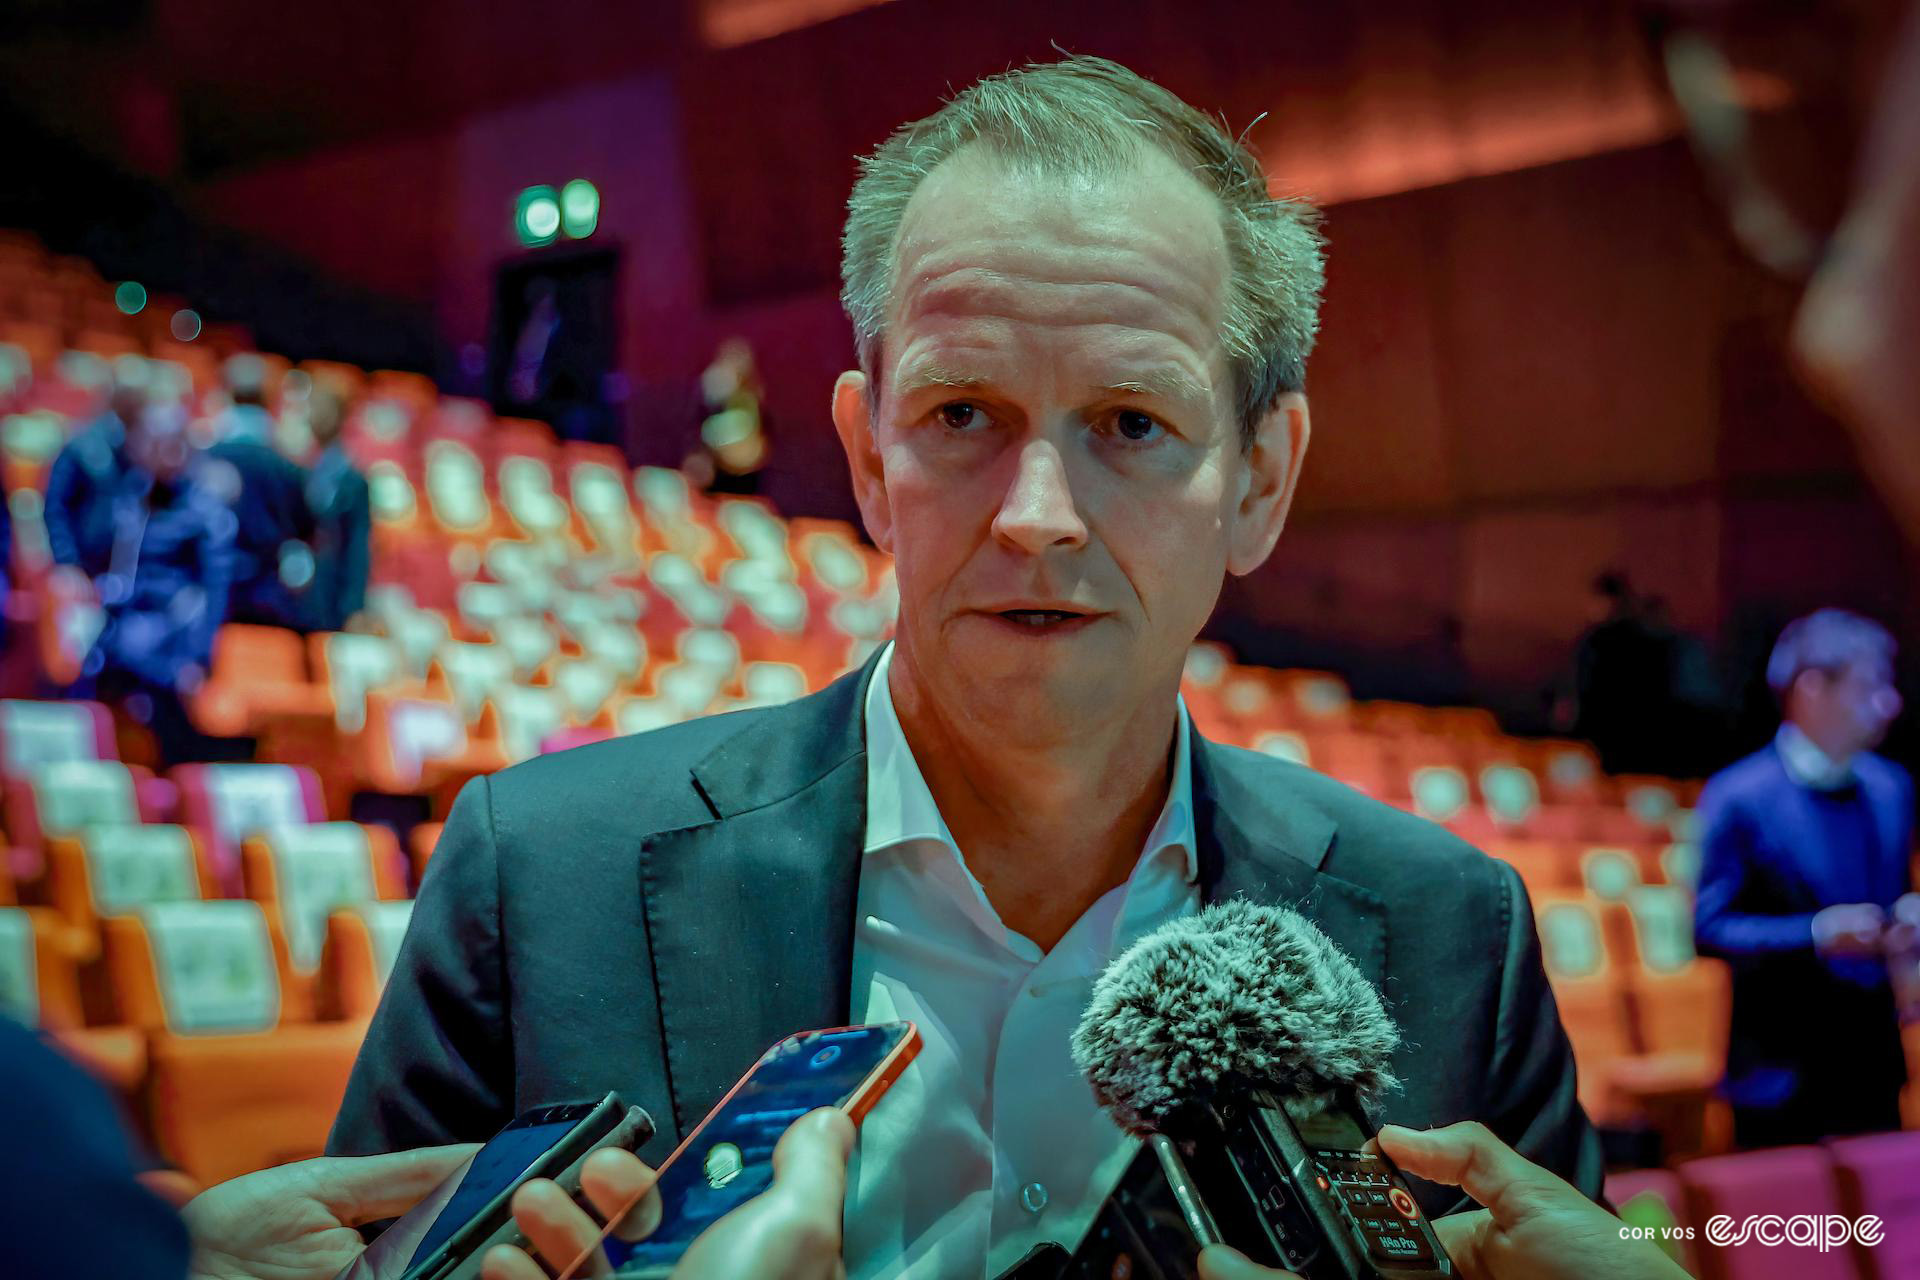 Jumbo-Visma CEO Richard Plugge being interviewed at the end of the 2024 Tour de France presentation.